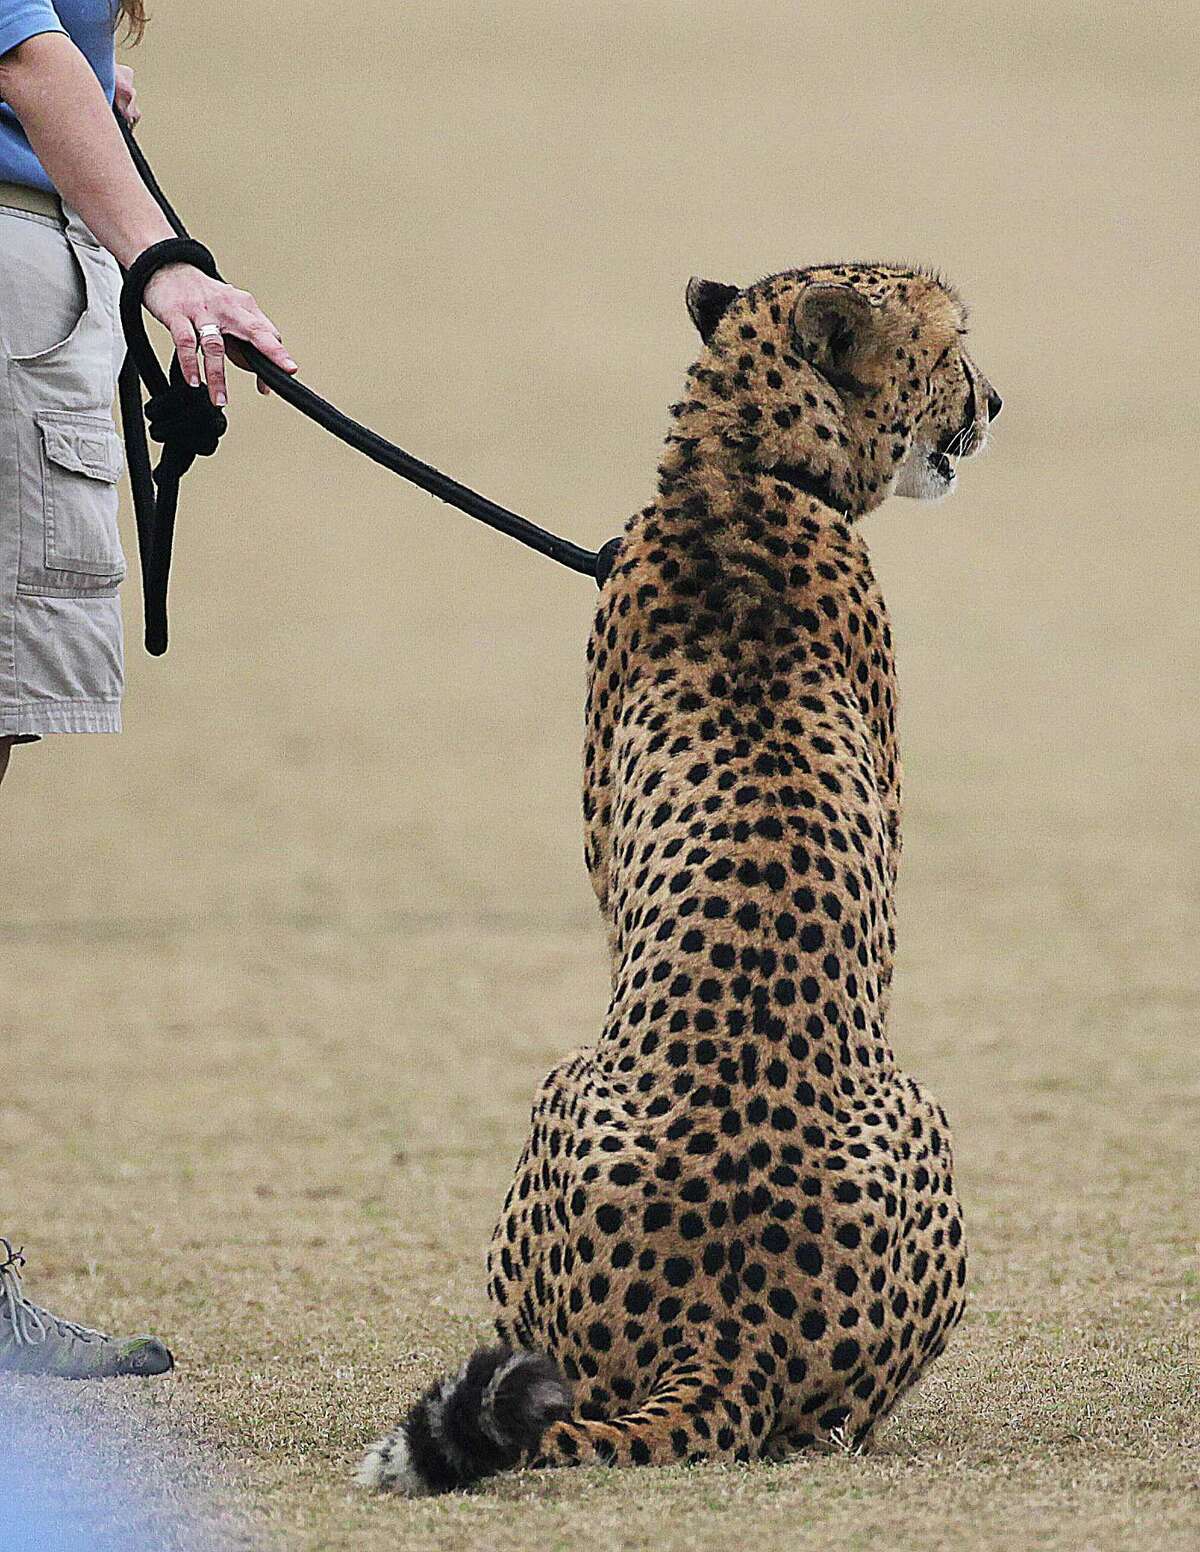 Houston Zoo Carnivore Supervisor Sara Riger touches one of the zoo's two male cheetahs, Kito and Kiburi later ran off leash at the Houston Dynamo's practice field located at Houston Sports Park Wednesday, Dec. 4, 2013, in Houston. Today is International Cheetah Day.